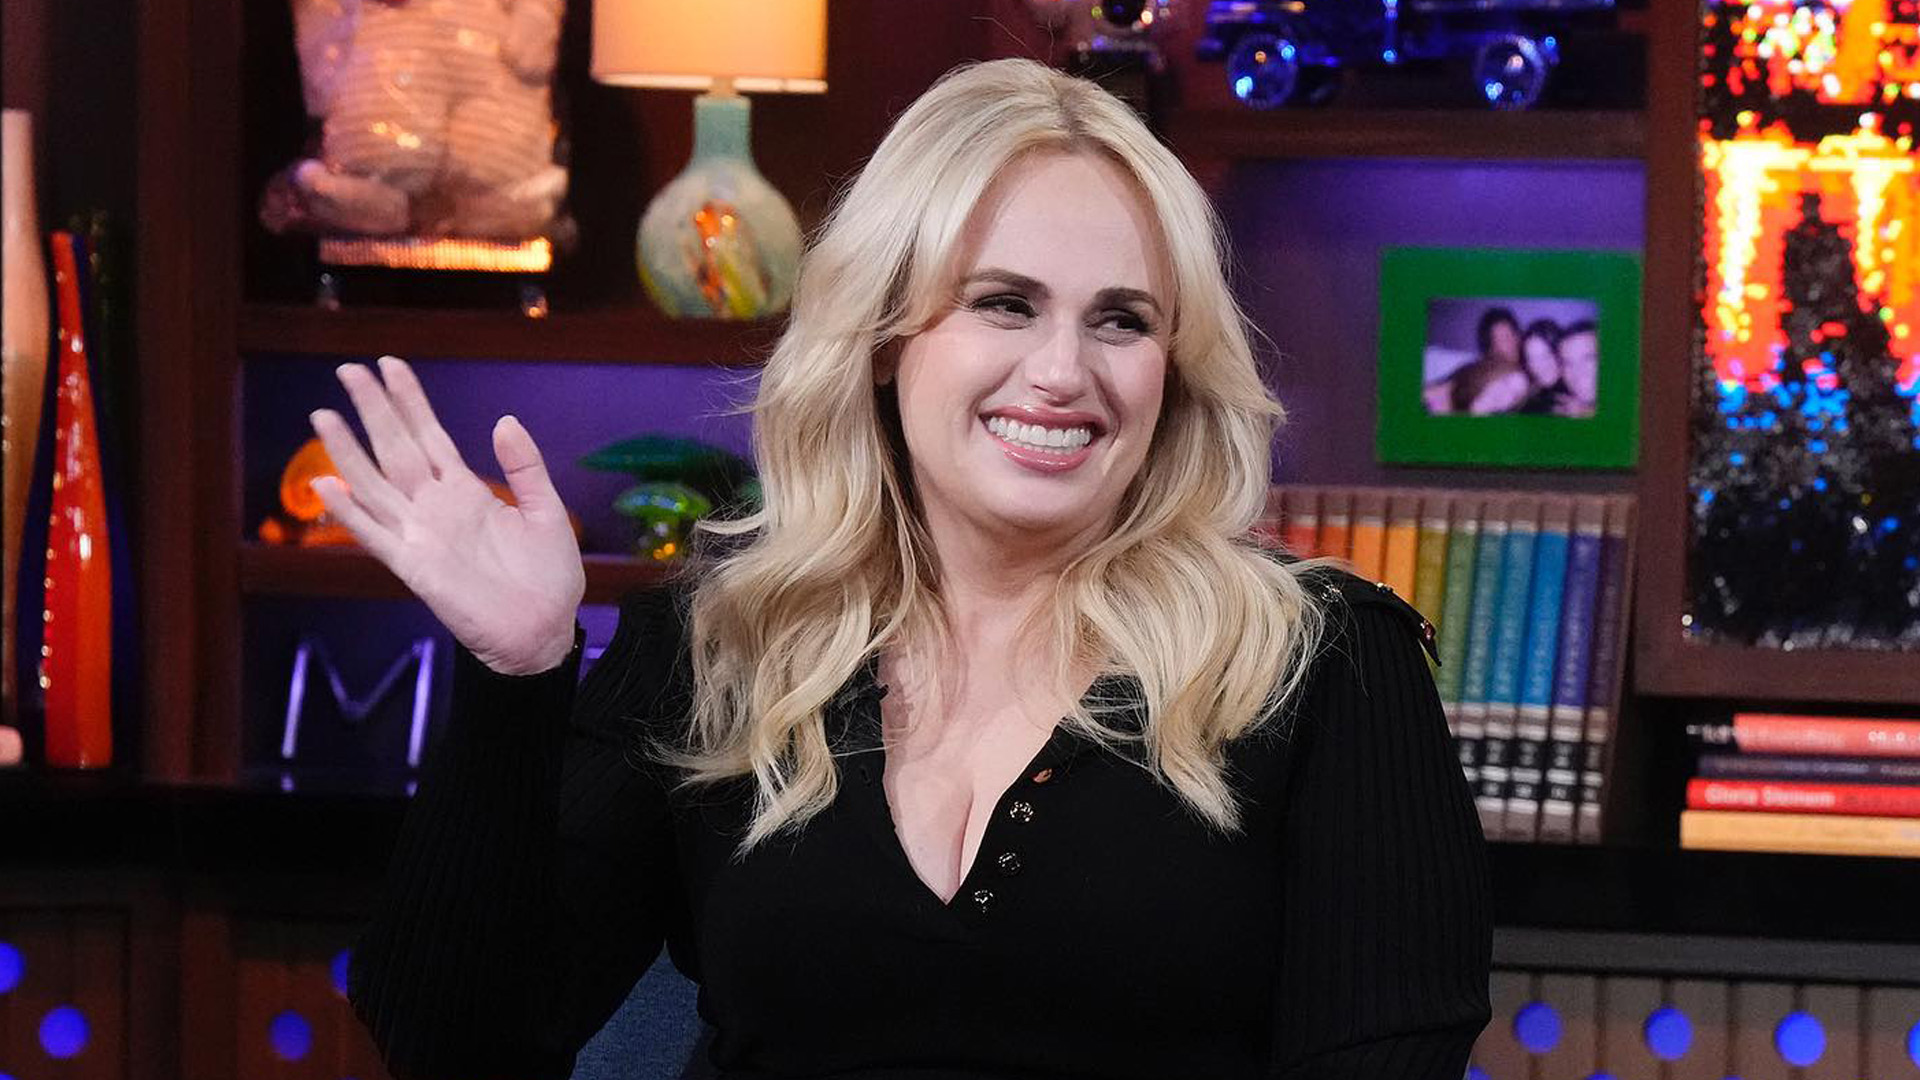 Rebel Wilson looks ‘amazing’ after 80-lb weight loss, fans say as star goes on WWHL in tight black dress and fishnets [Video]